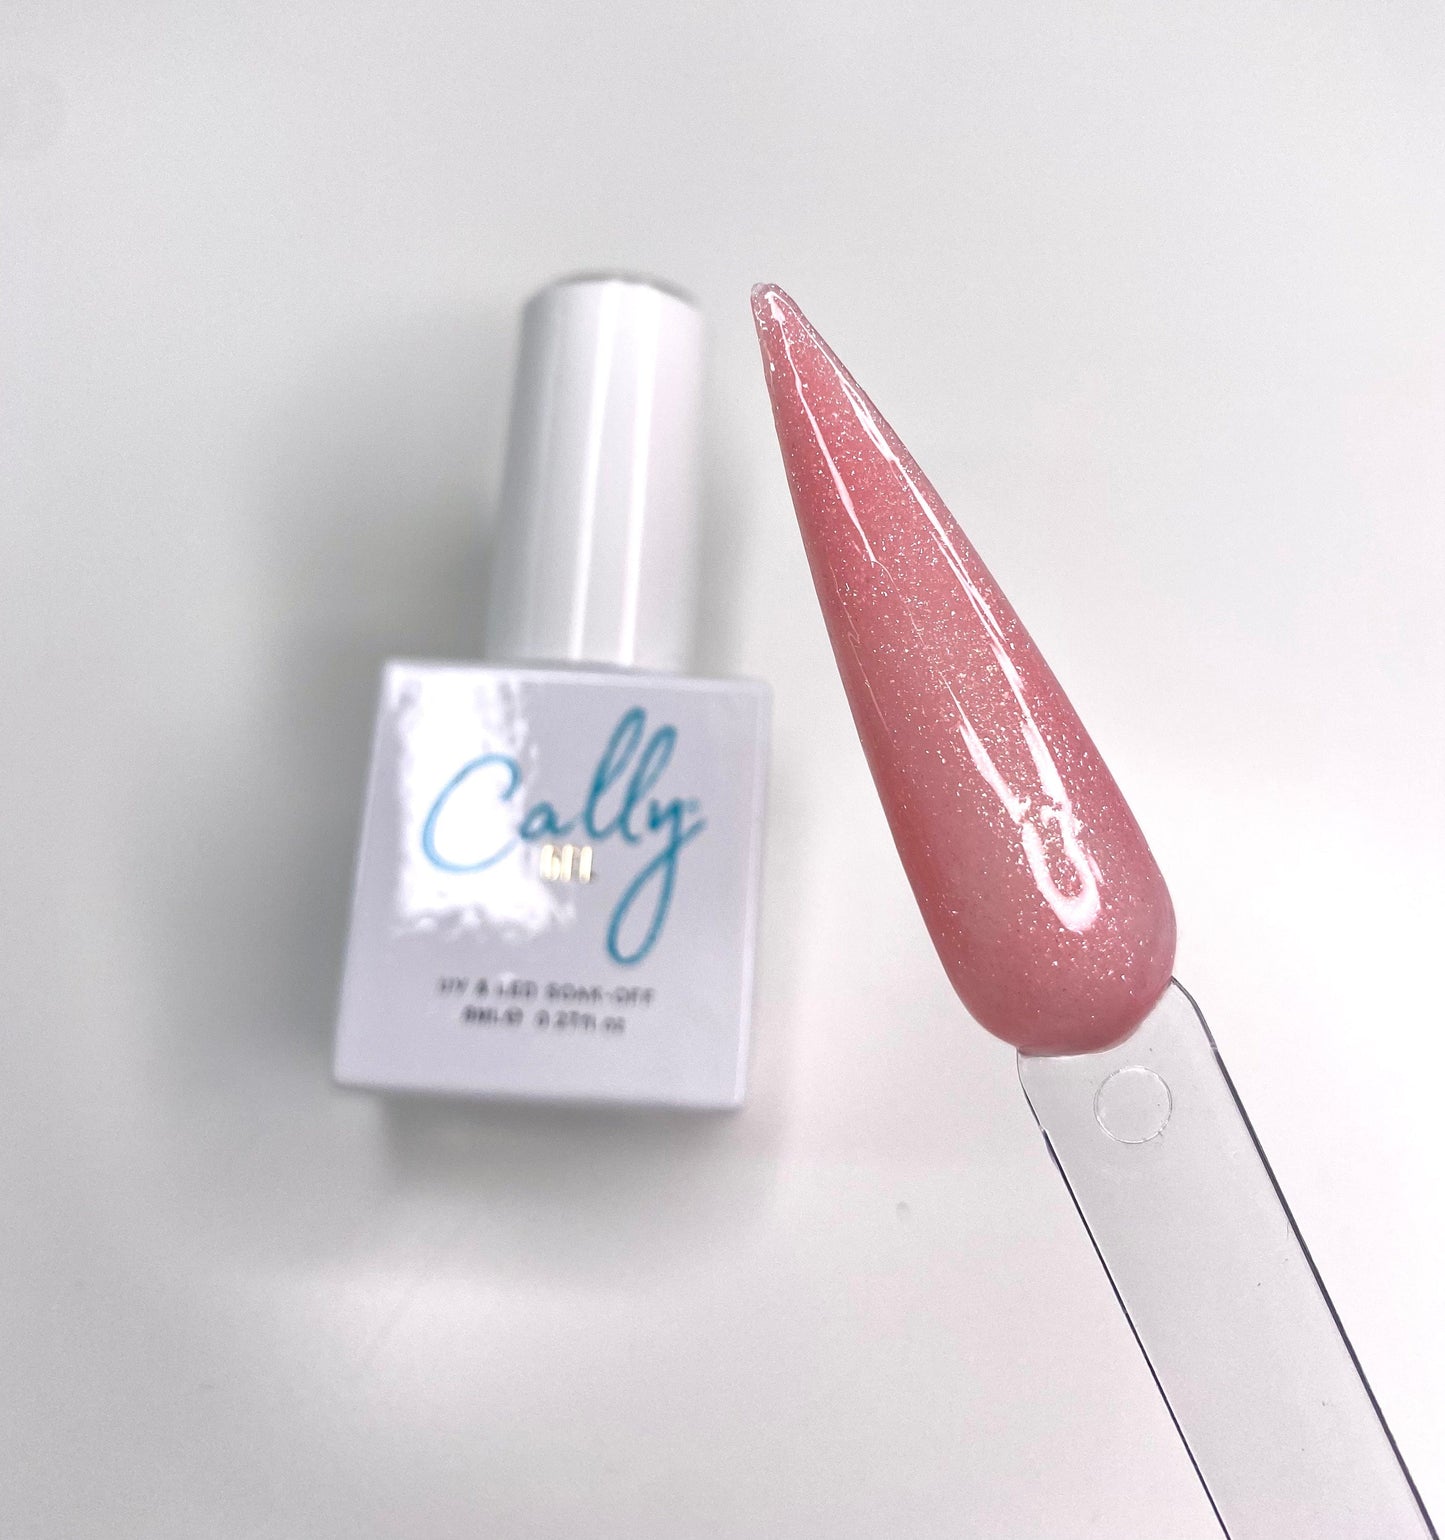 Heavenly Pink Cally Gel Nail Polish 8ml Bottle and a Colour Sample